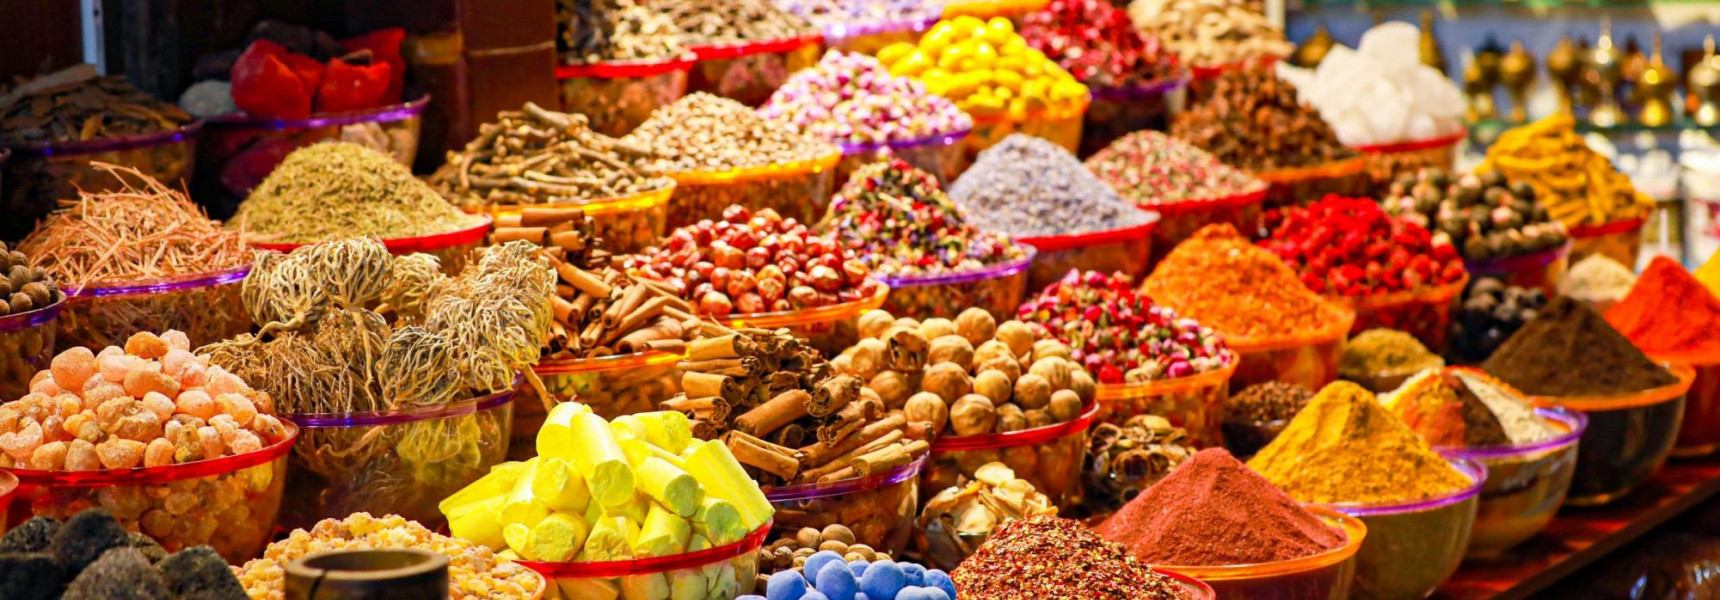 Top 5 Authentic Food and Drink Tours in Dubai